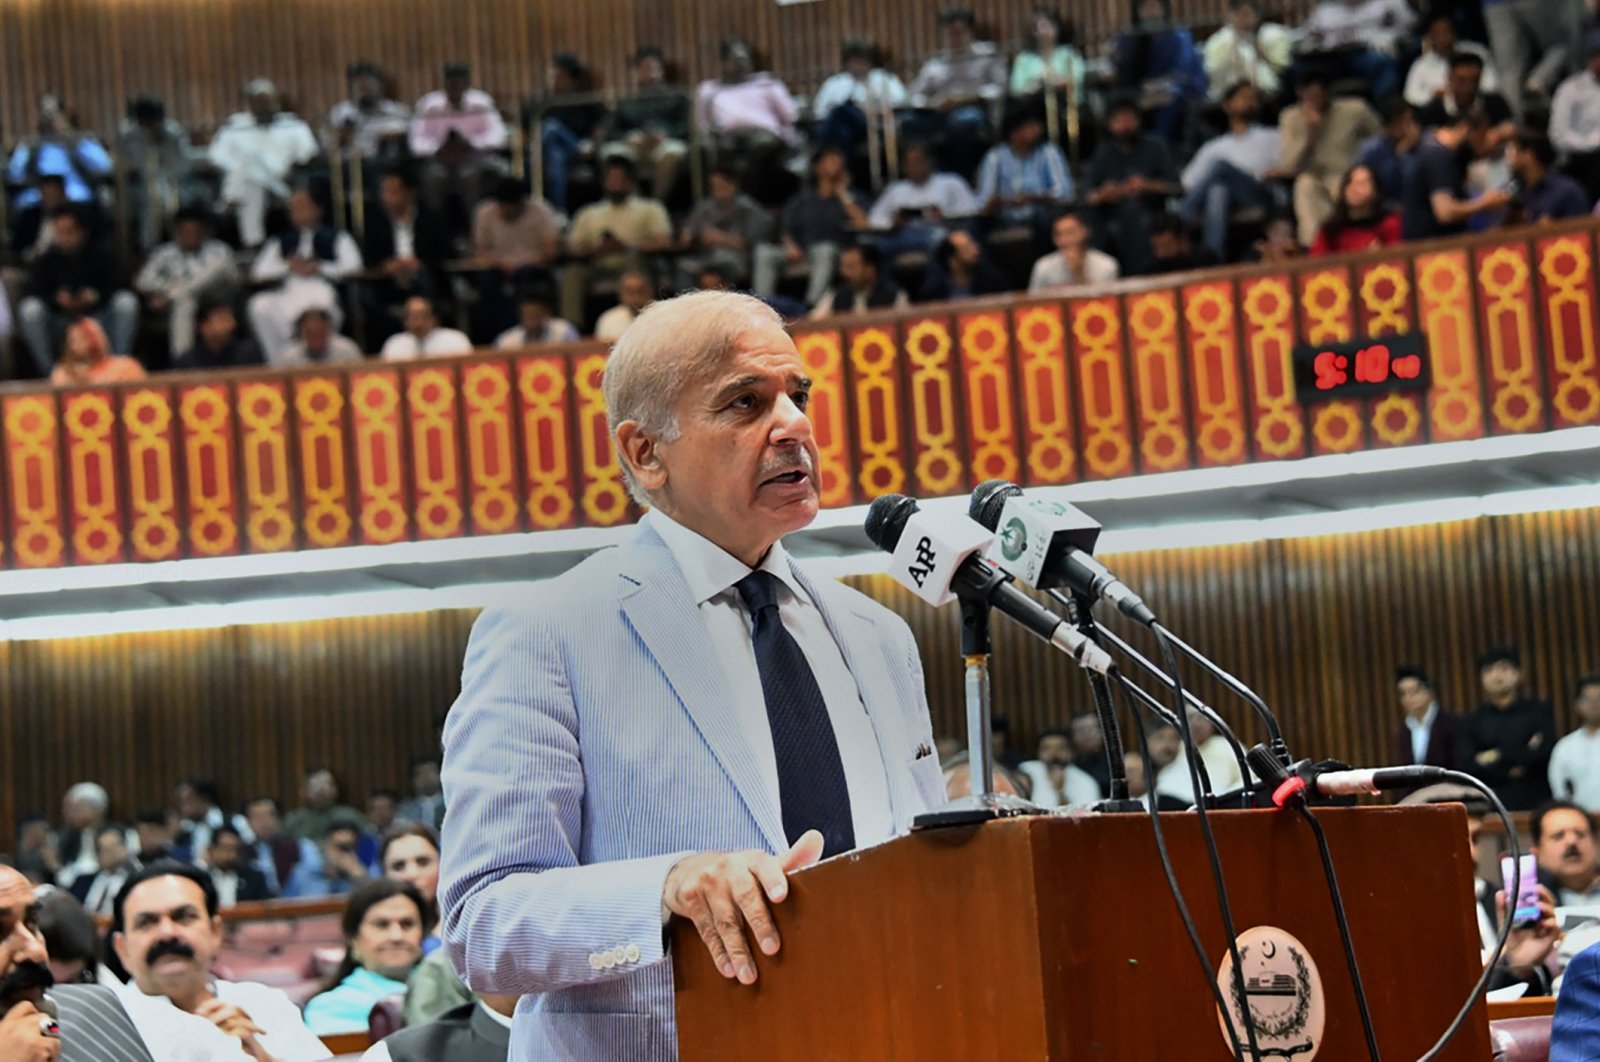 In this photo released by the National Assembly of Pakistan, newly elected Pakistani Prime Minister Shahbaz Sharif addresses a National Assembly session, in Islamabad, Pakistan, April 11, 2022. (National Assembly of Pakistan via AP)